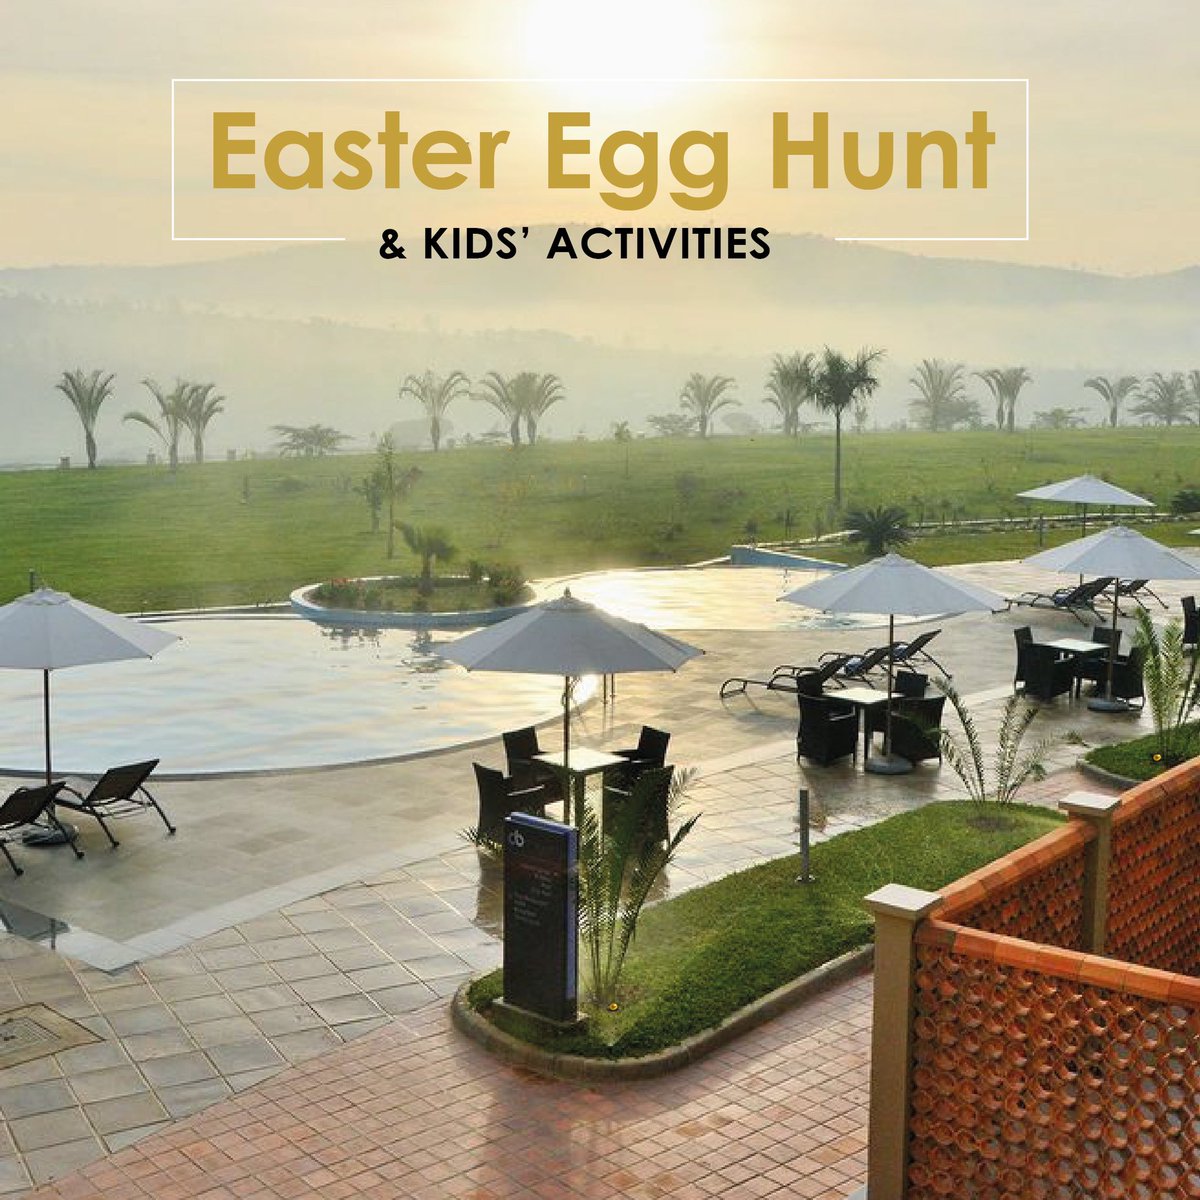 Make this Easter truly epic at Mantis @EpicHotelSuites! Our exclusive package offers accommodation, delicious dining, and fun-filled activities for all ages. Don't miss out on our Easter egg hunt, movie nights, BBQs, and more! For enquiries and booking👇🏿 #StayInNyagatare